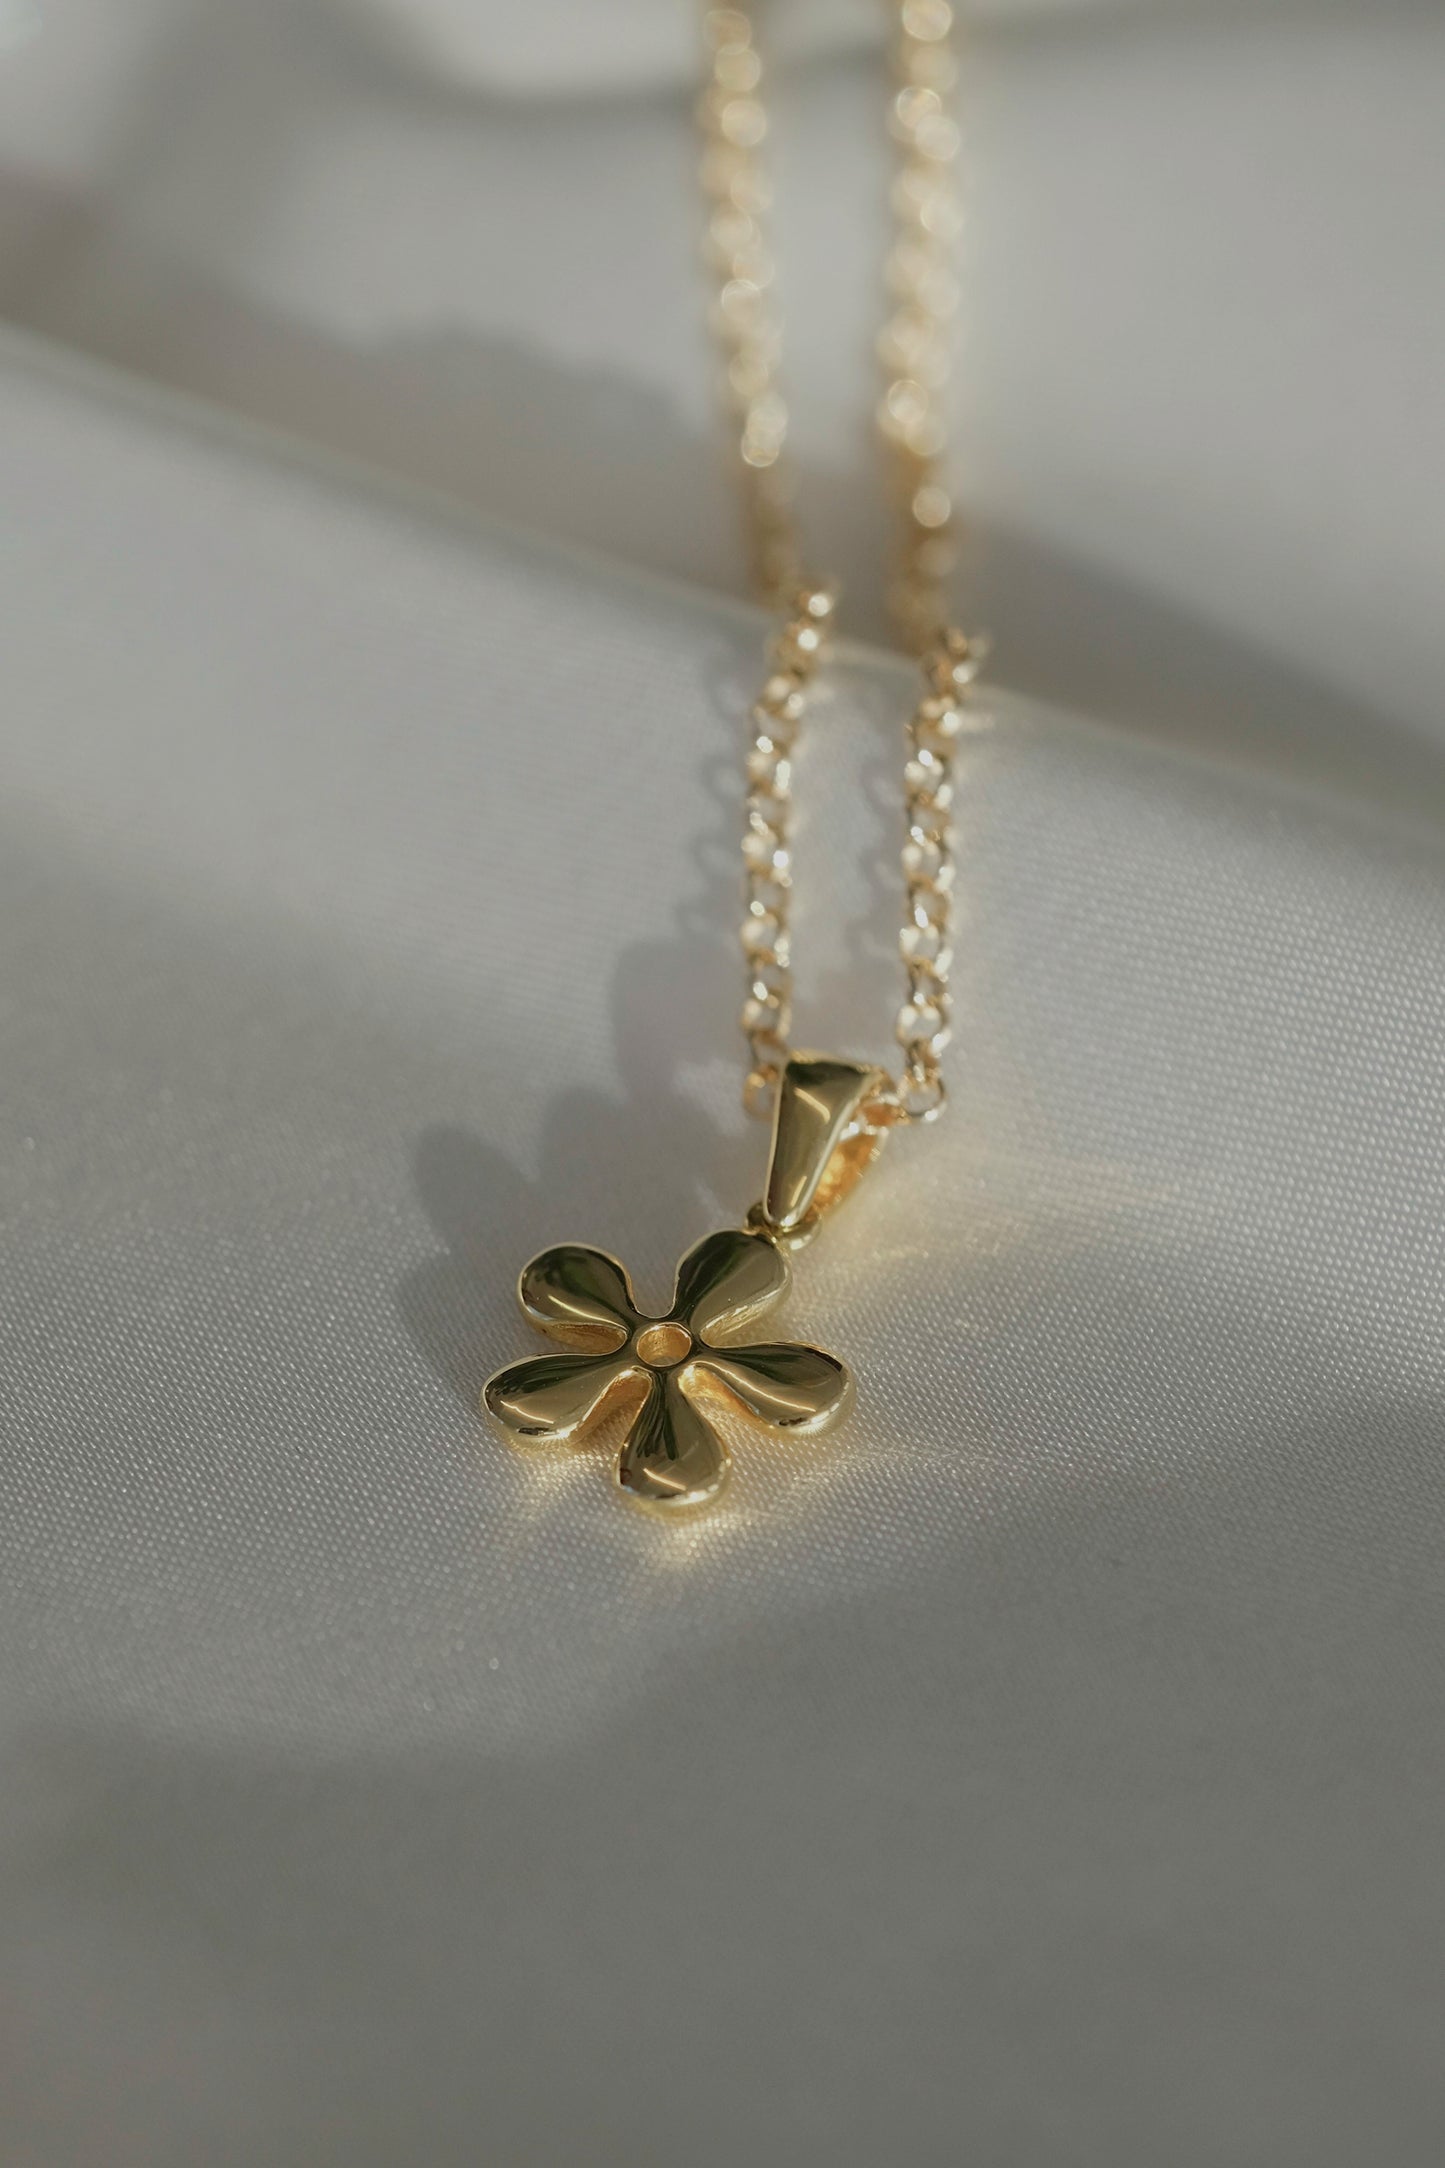 70's daisy charm gold-filled sterling silver necklace